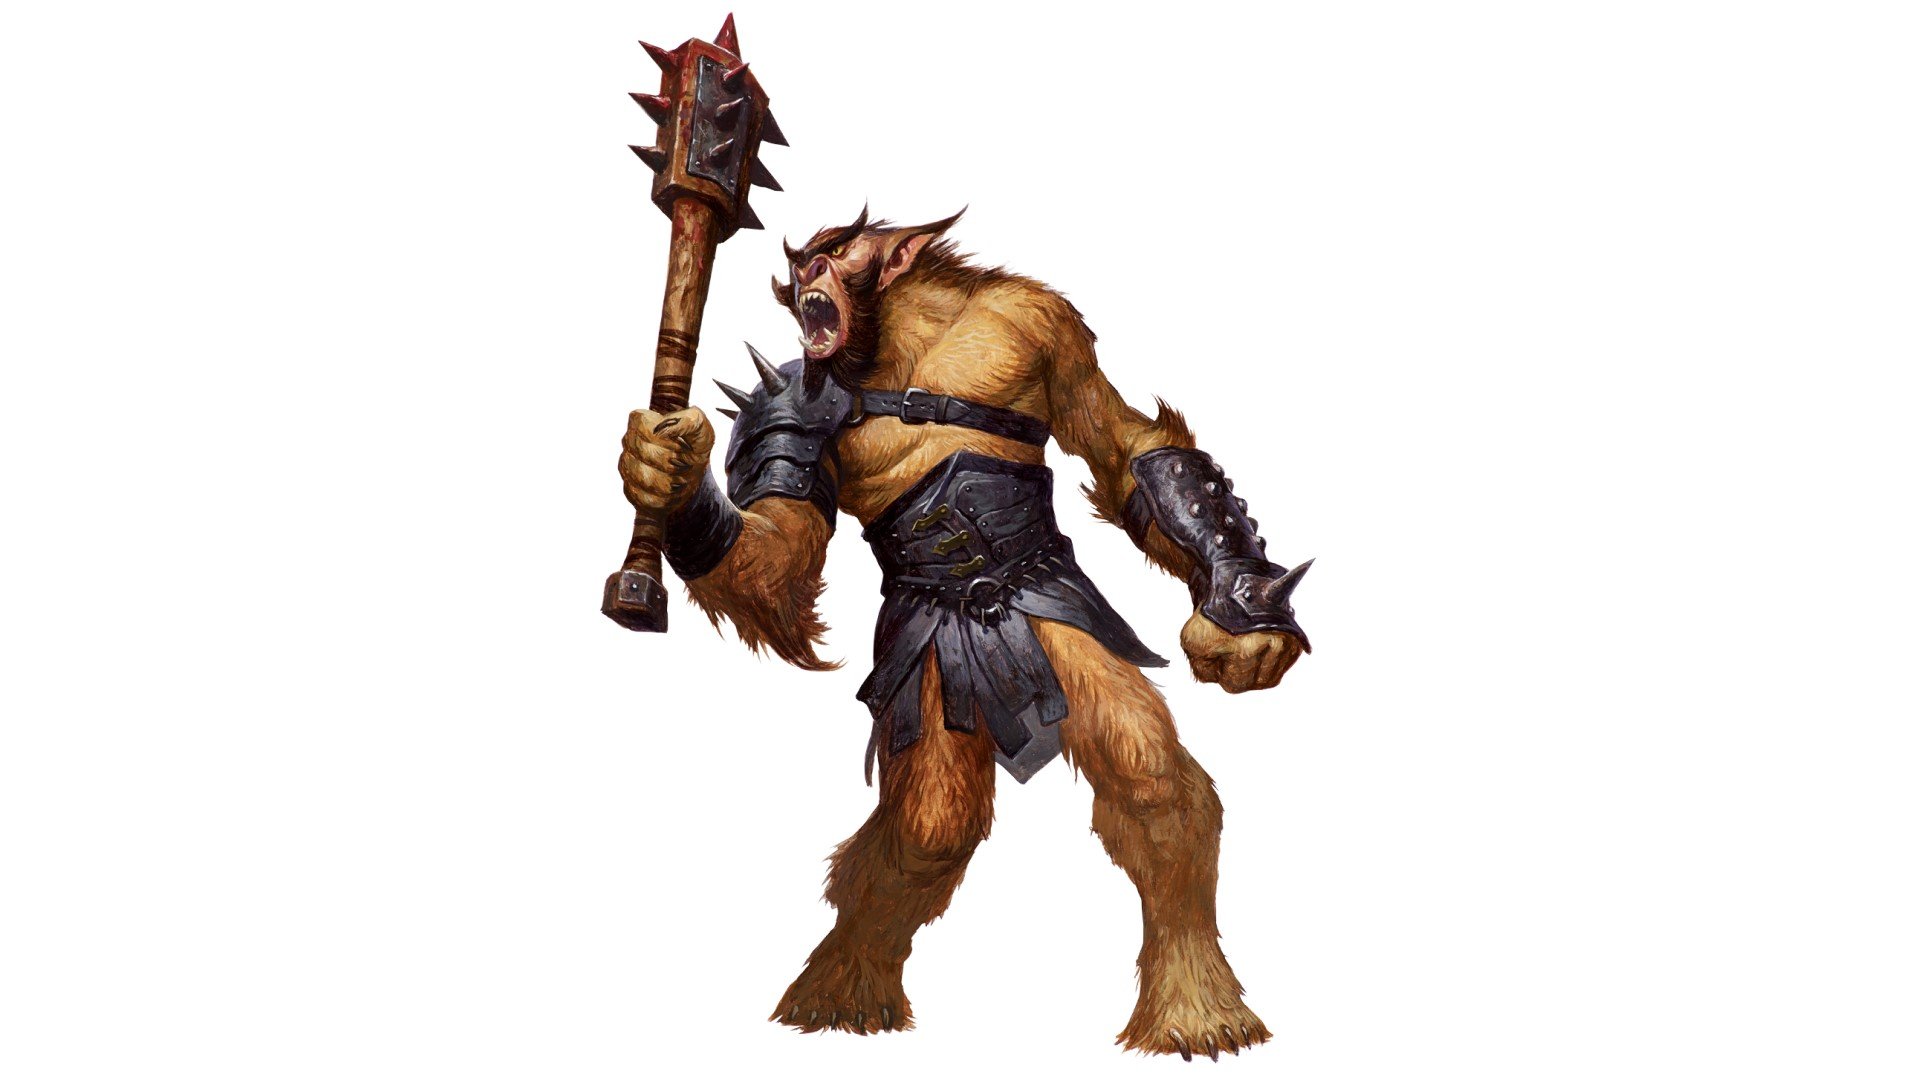 DnD Barbarian 5E class guide - Wizards of the Coast artwork showing a Bugbear